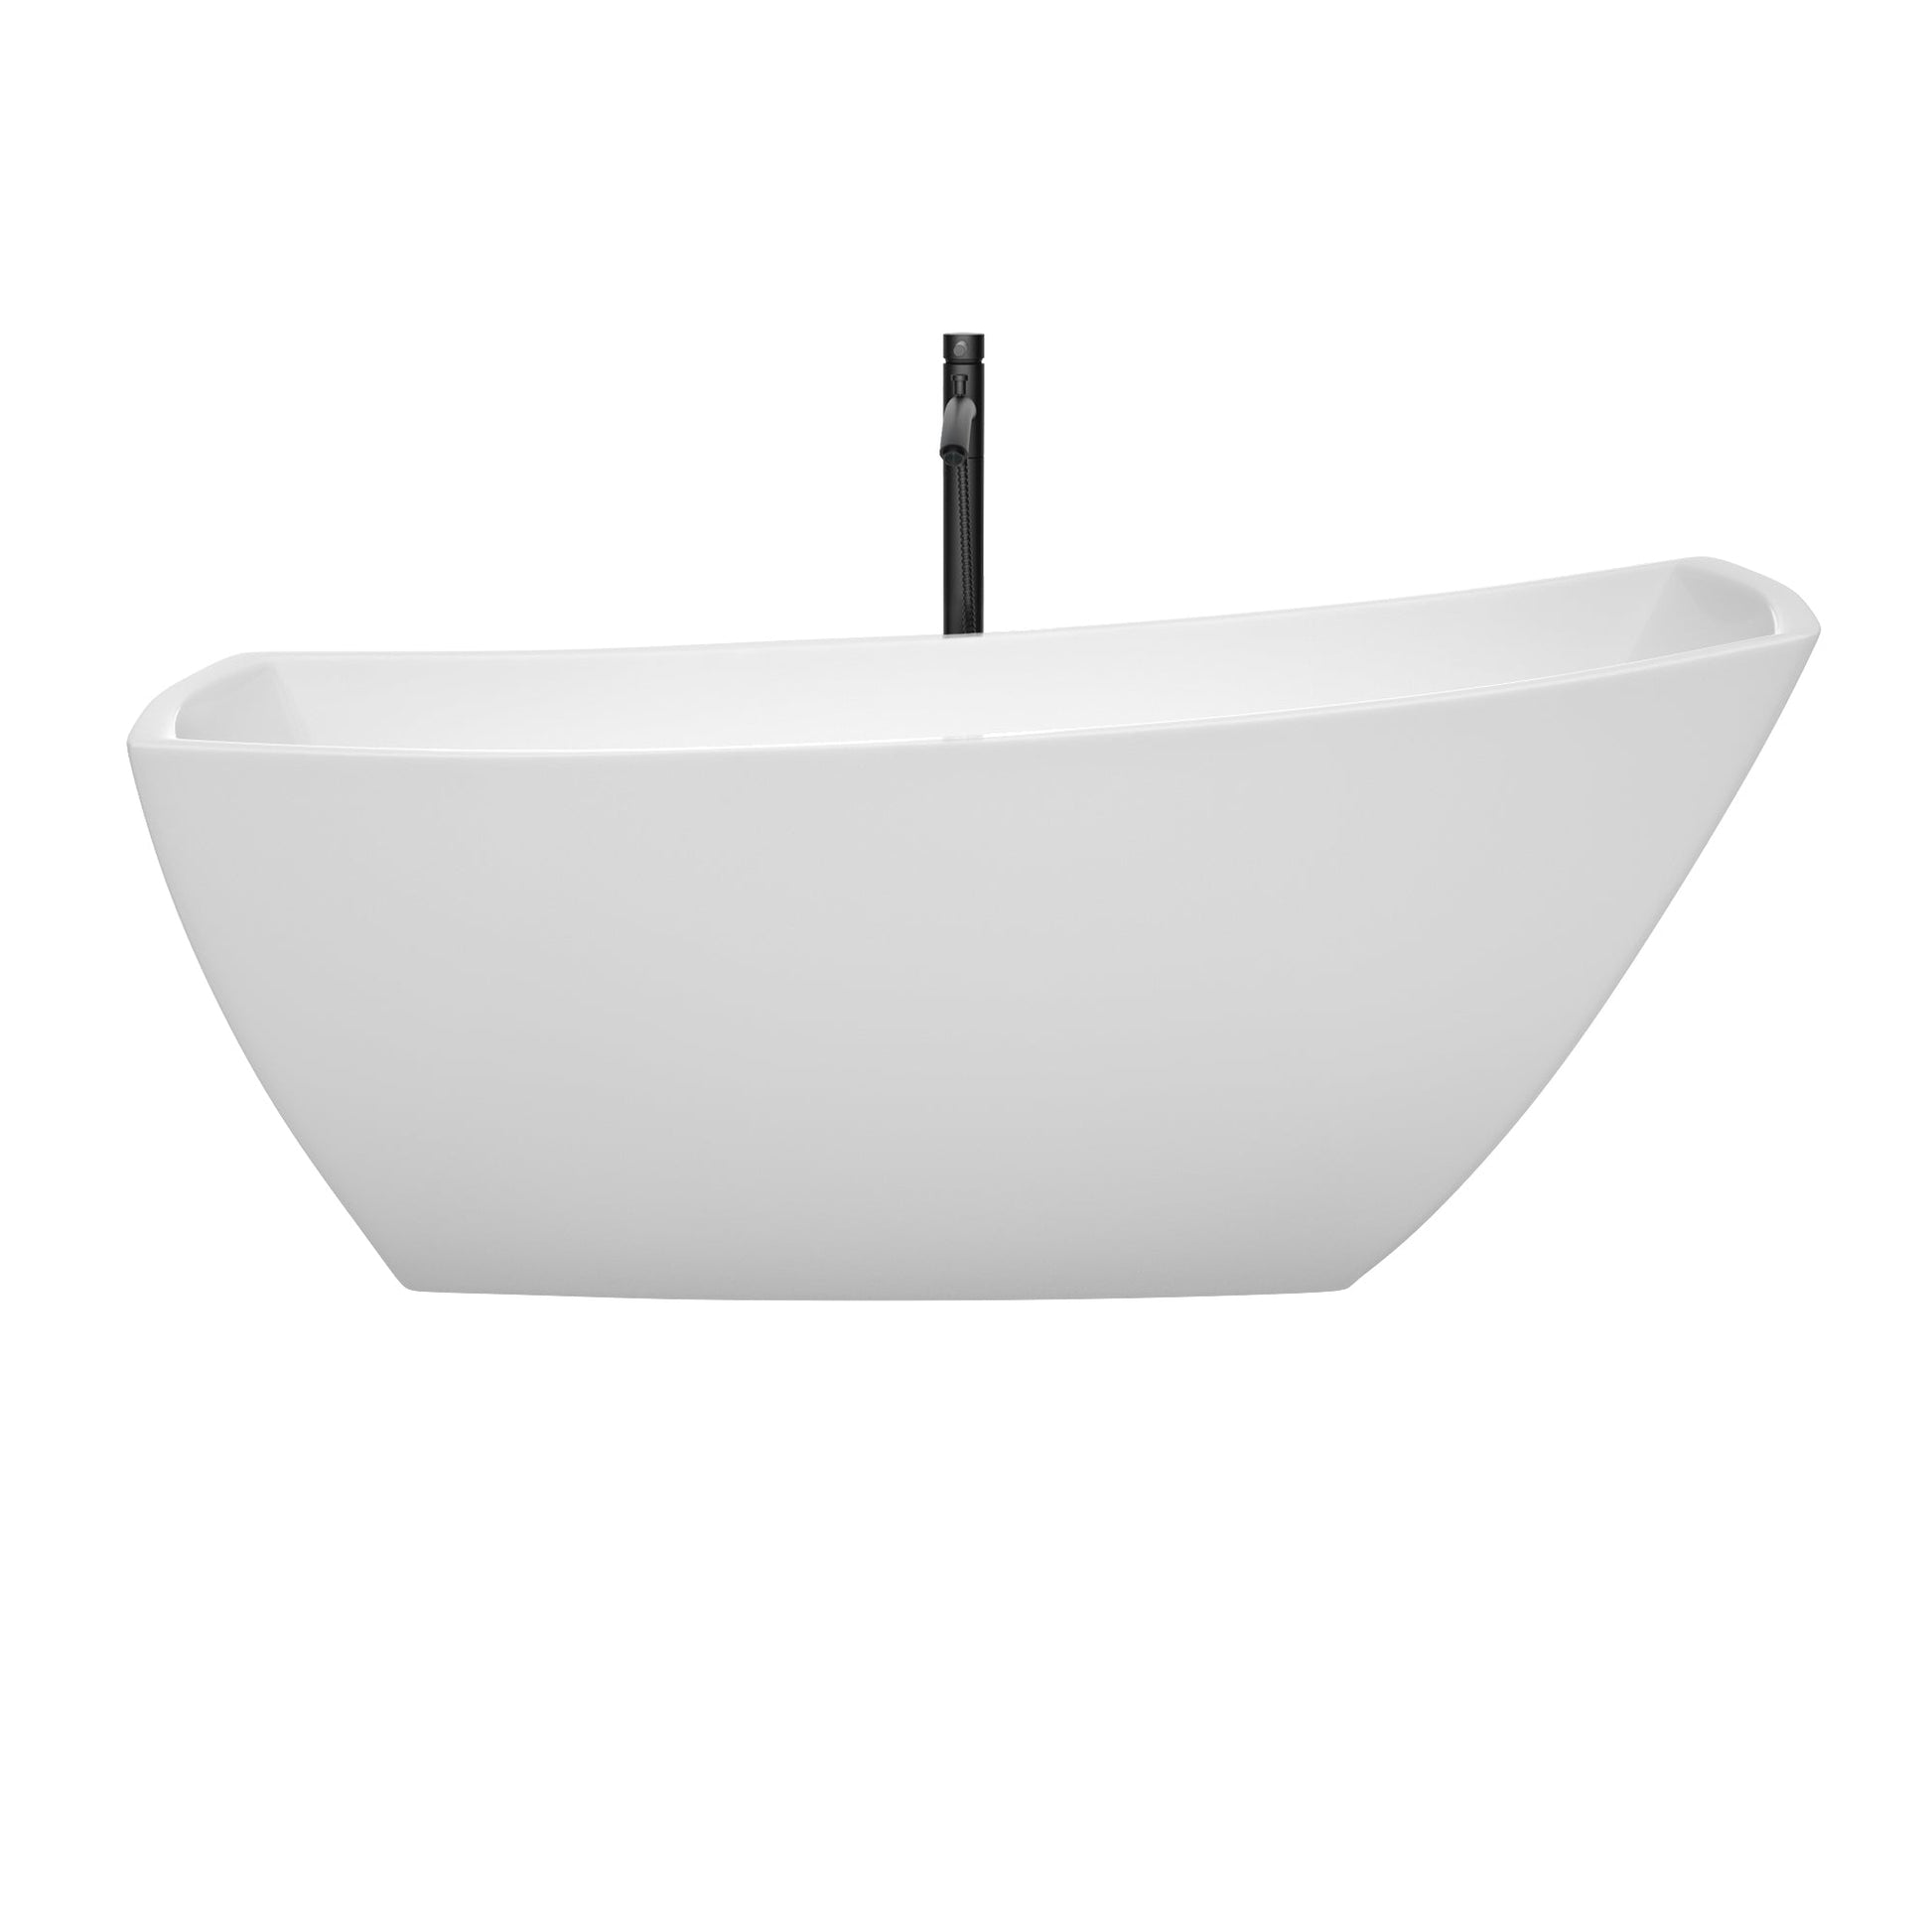 Wyndham Collection Antigua 67" Freestanding Bathtub in White With Polished Chrome Trim and Floor Mounted Faucet in Matte Black